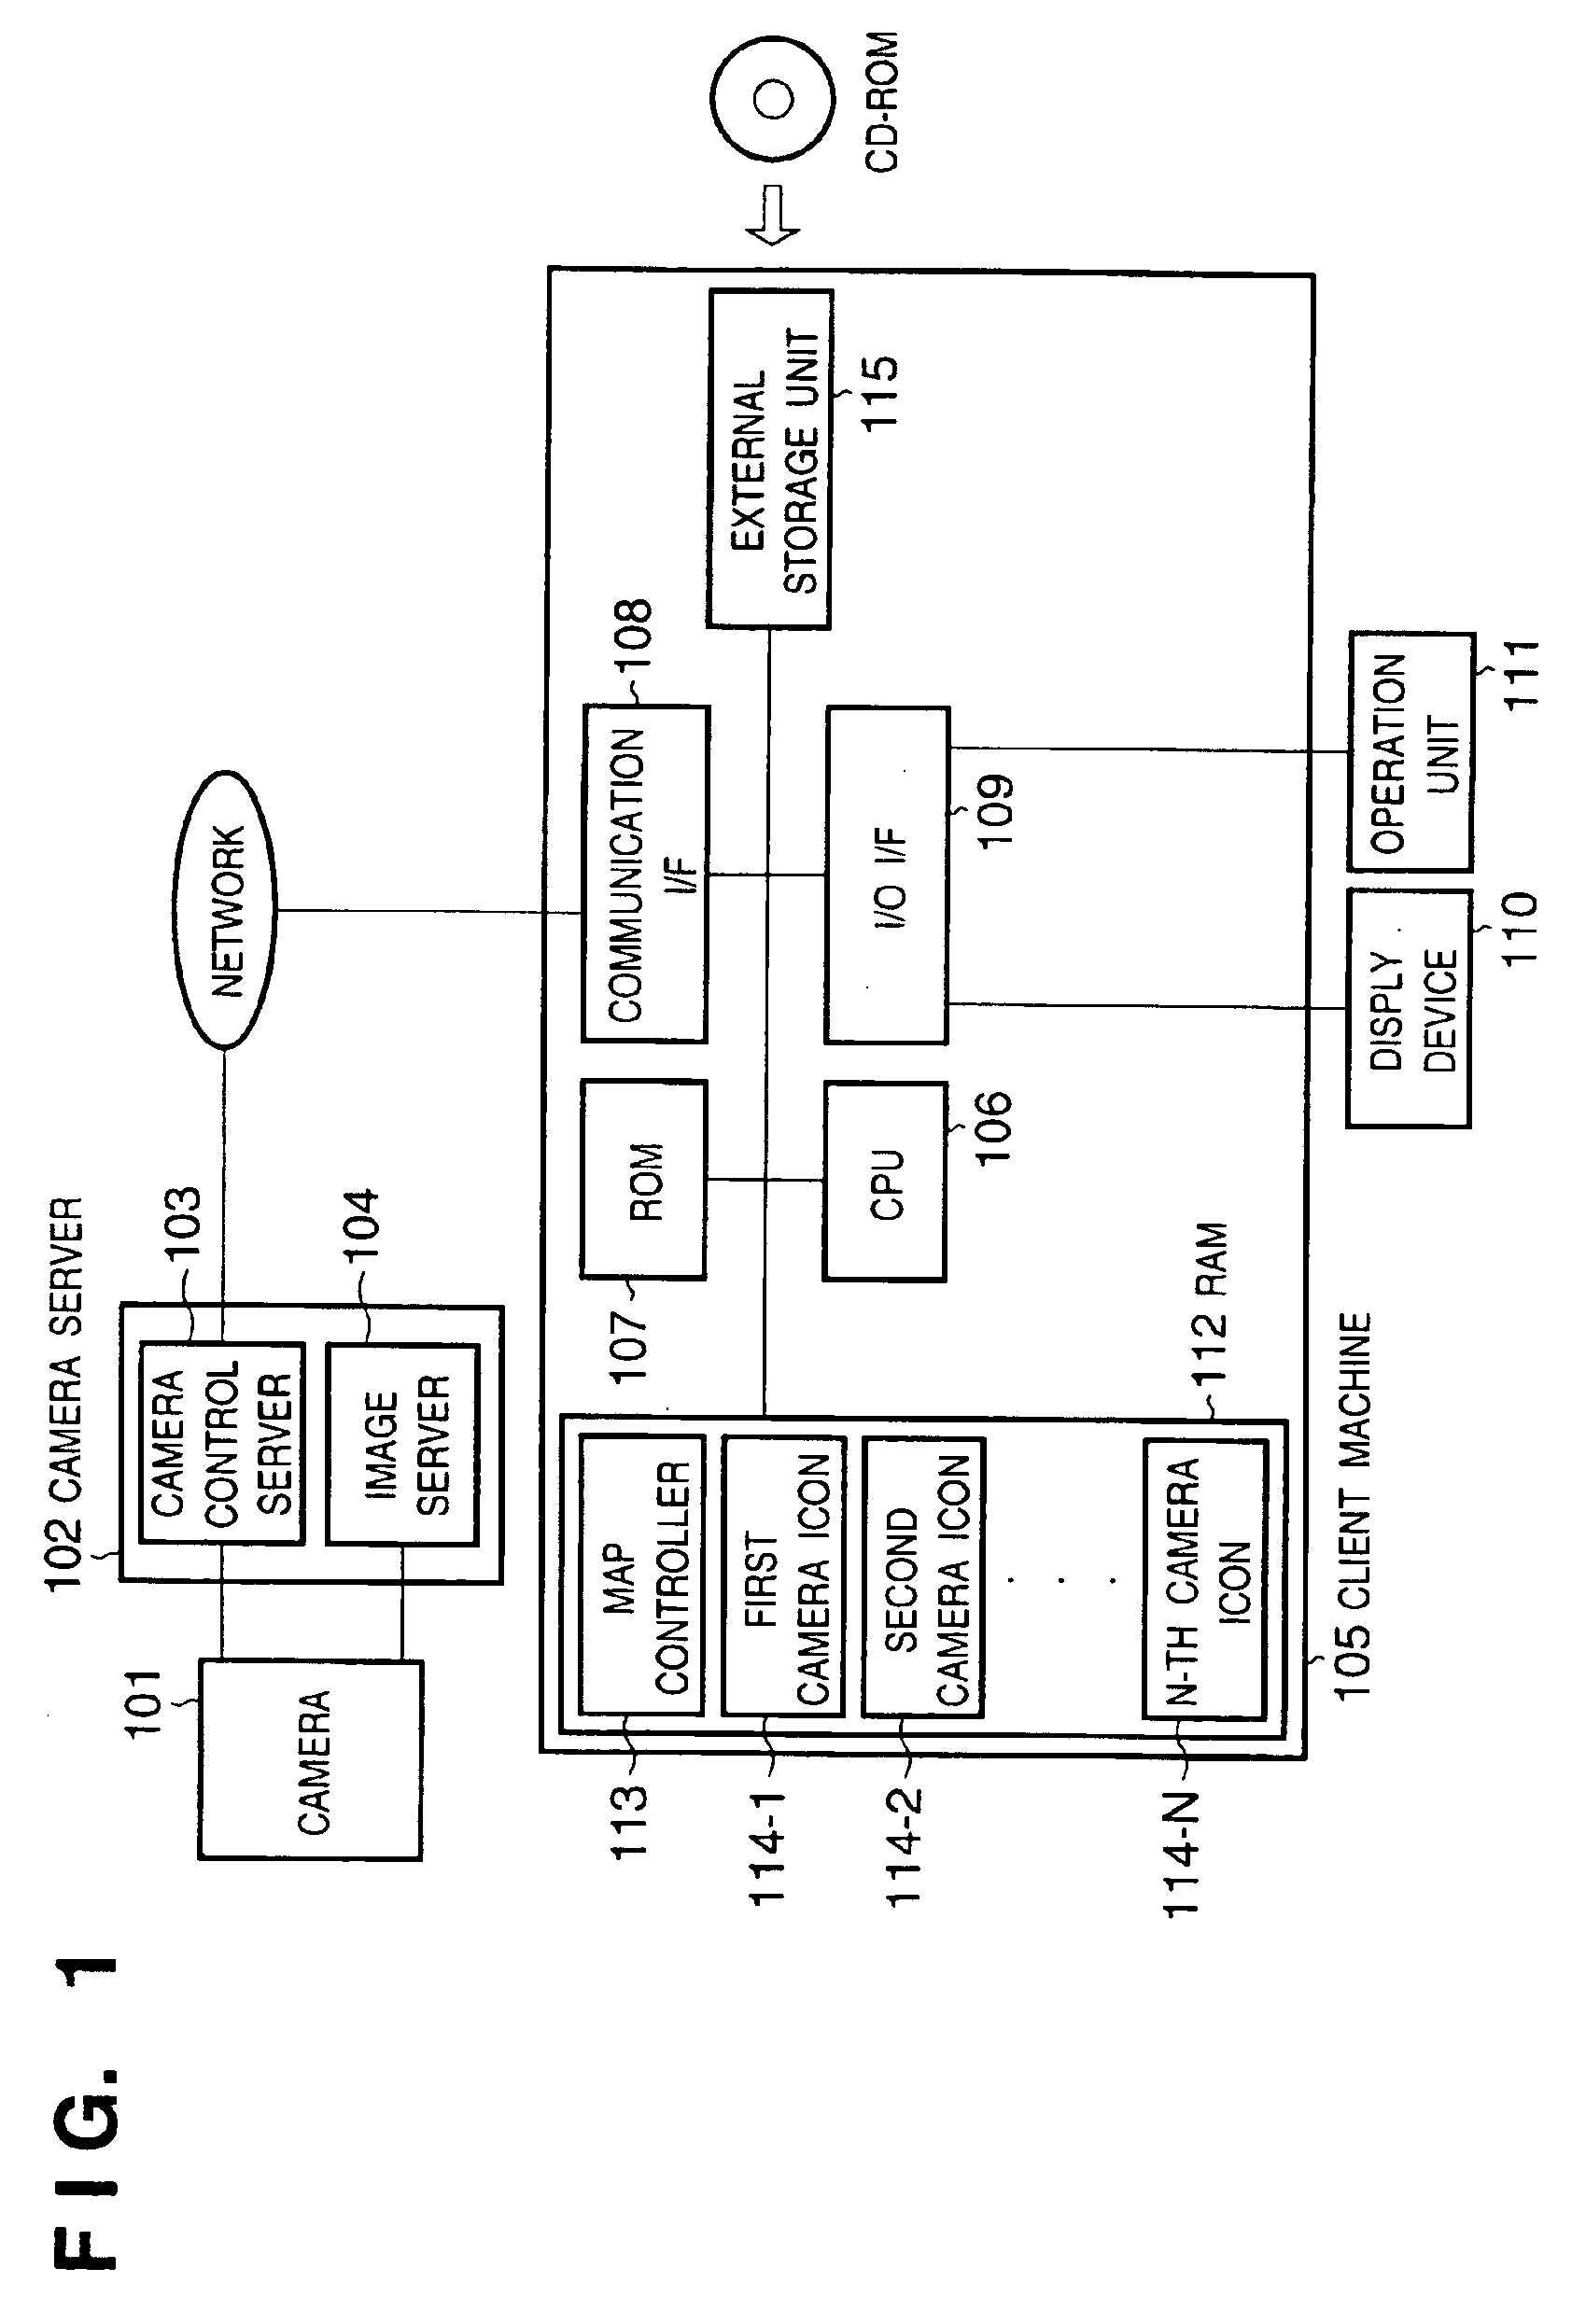 Apparatus and method for remote-controlling image sensing apparatus in image sensing system